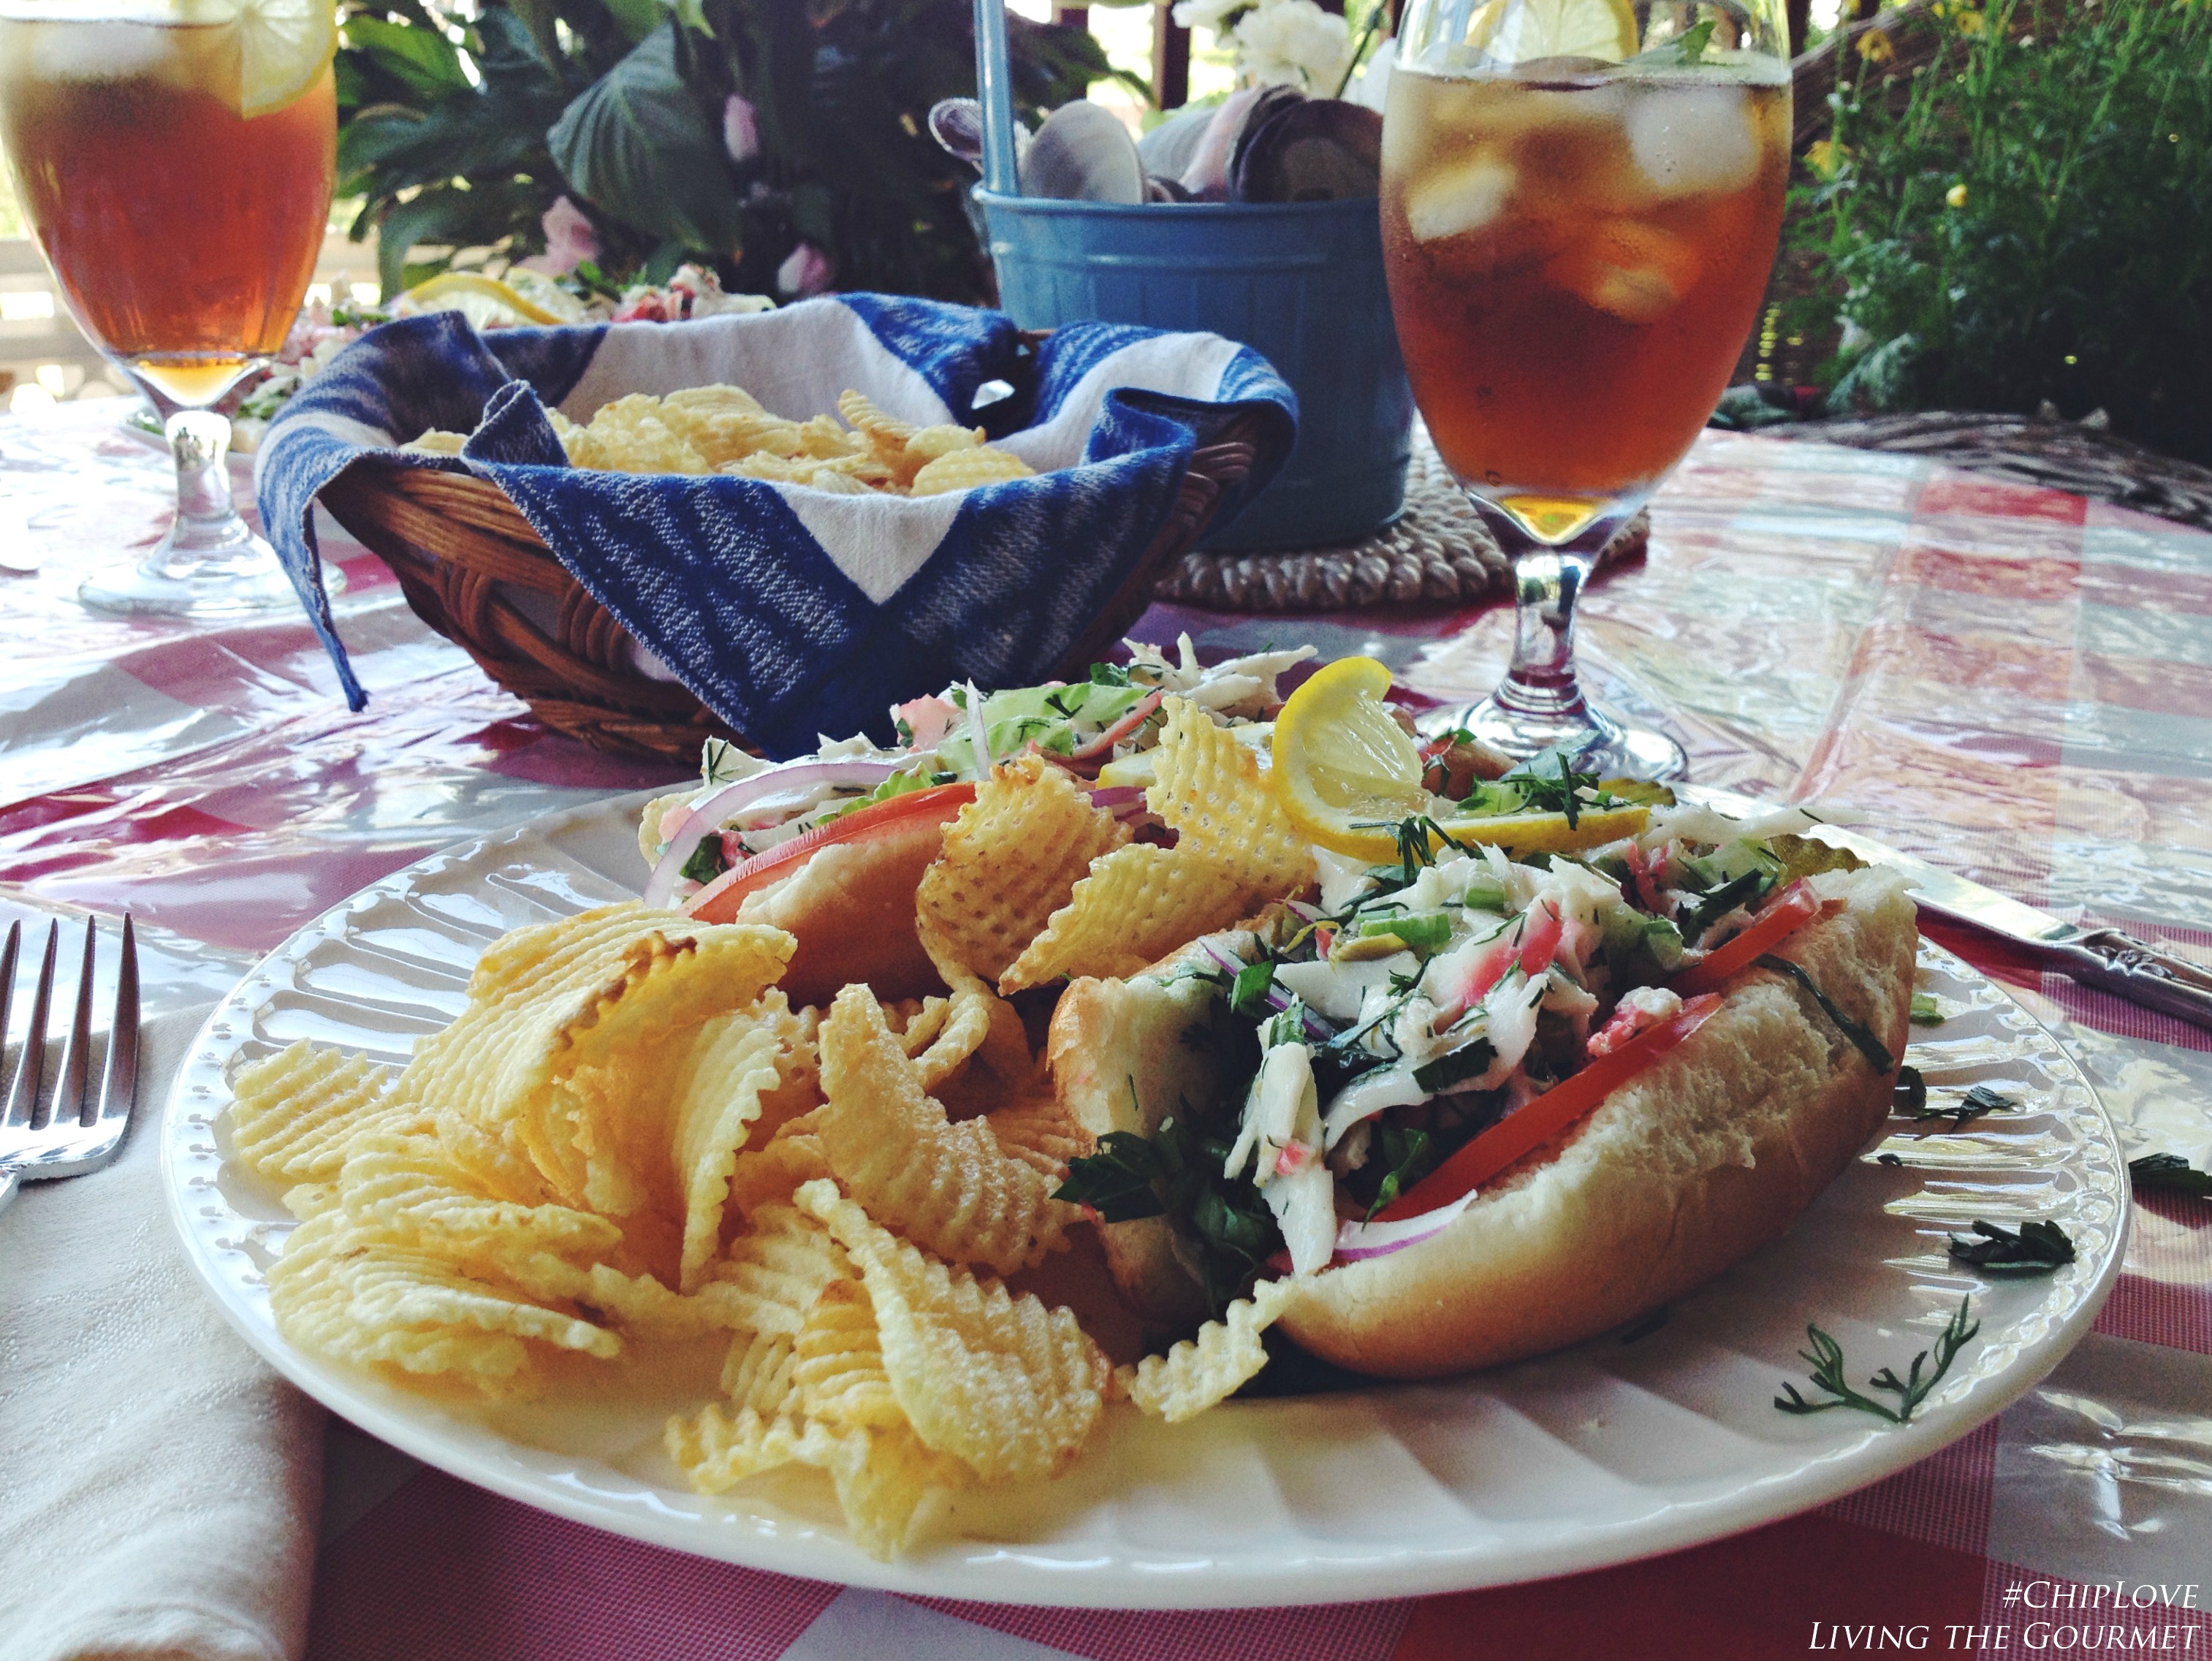  #AD #ChipLove | Living the Gourmet: Crab Salad Roll & Cape Cod Chips